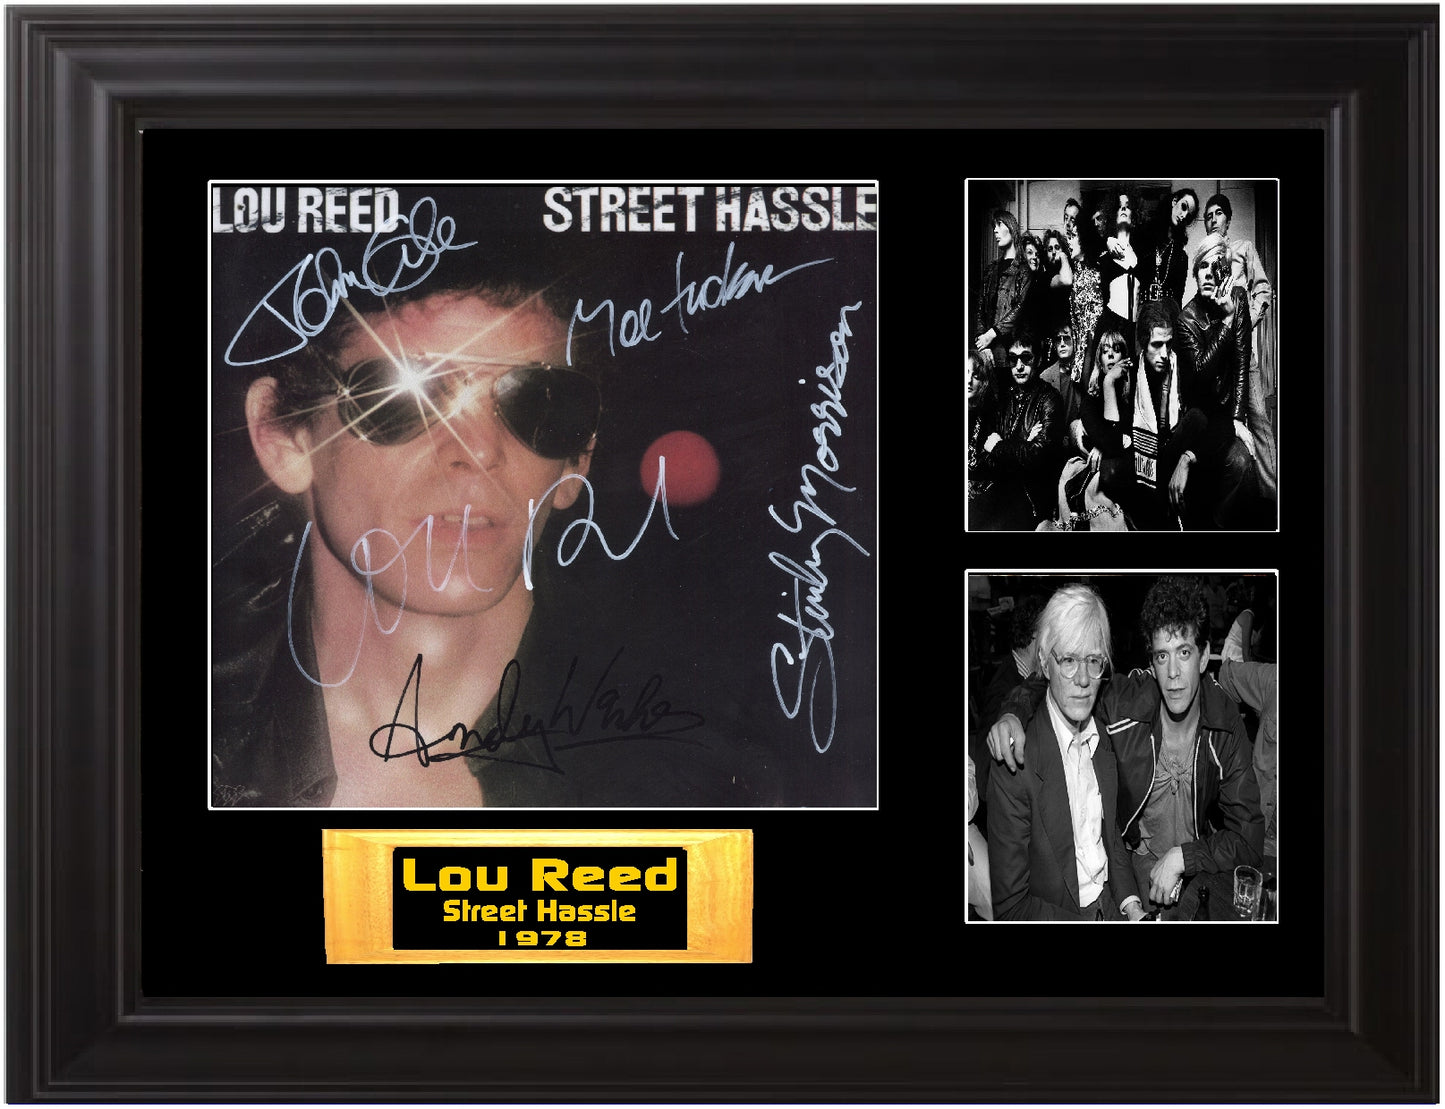 Lou Reed Autographed LP - Zion Graphic Collectibles